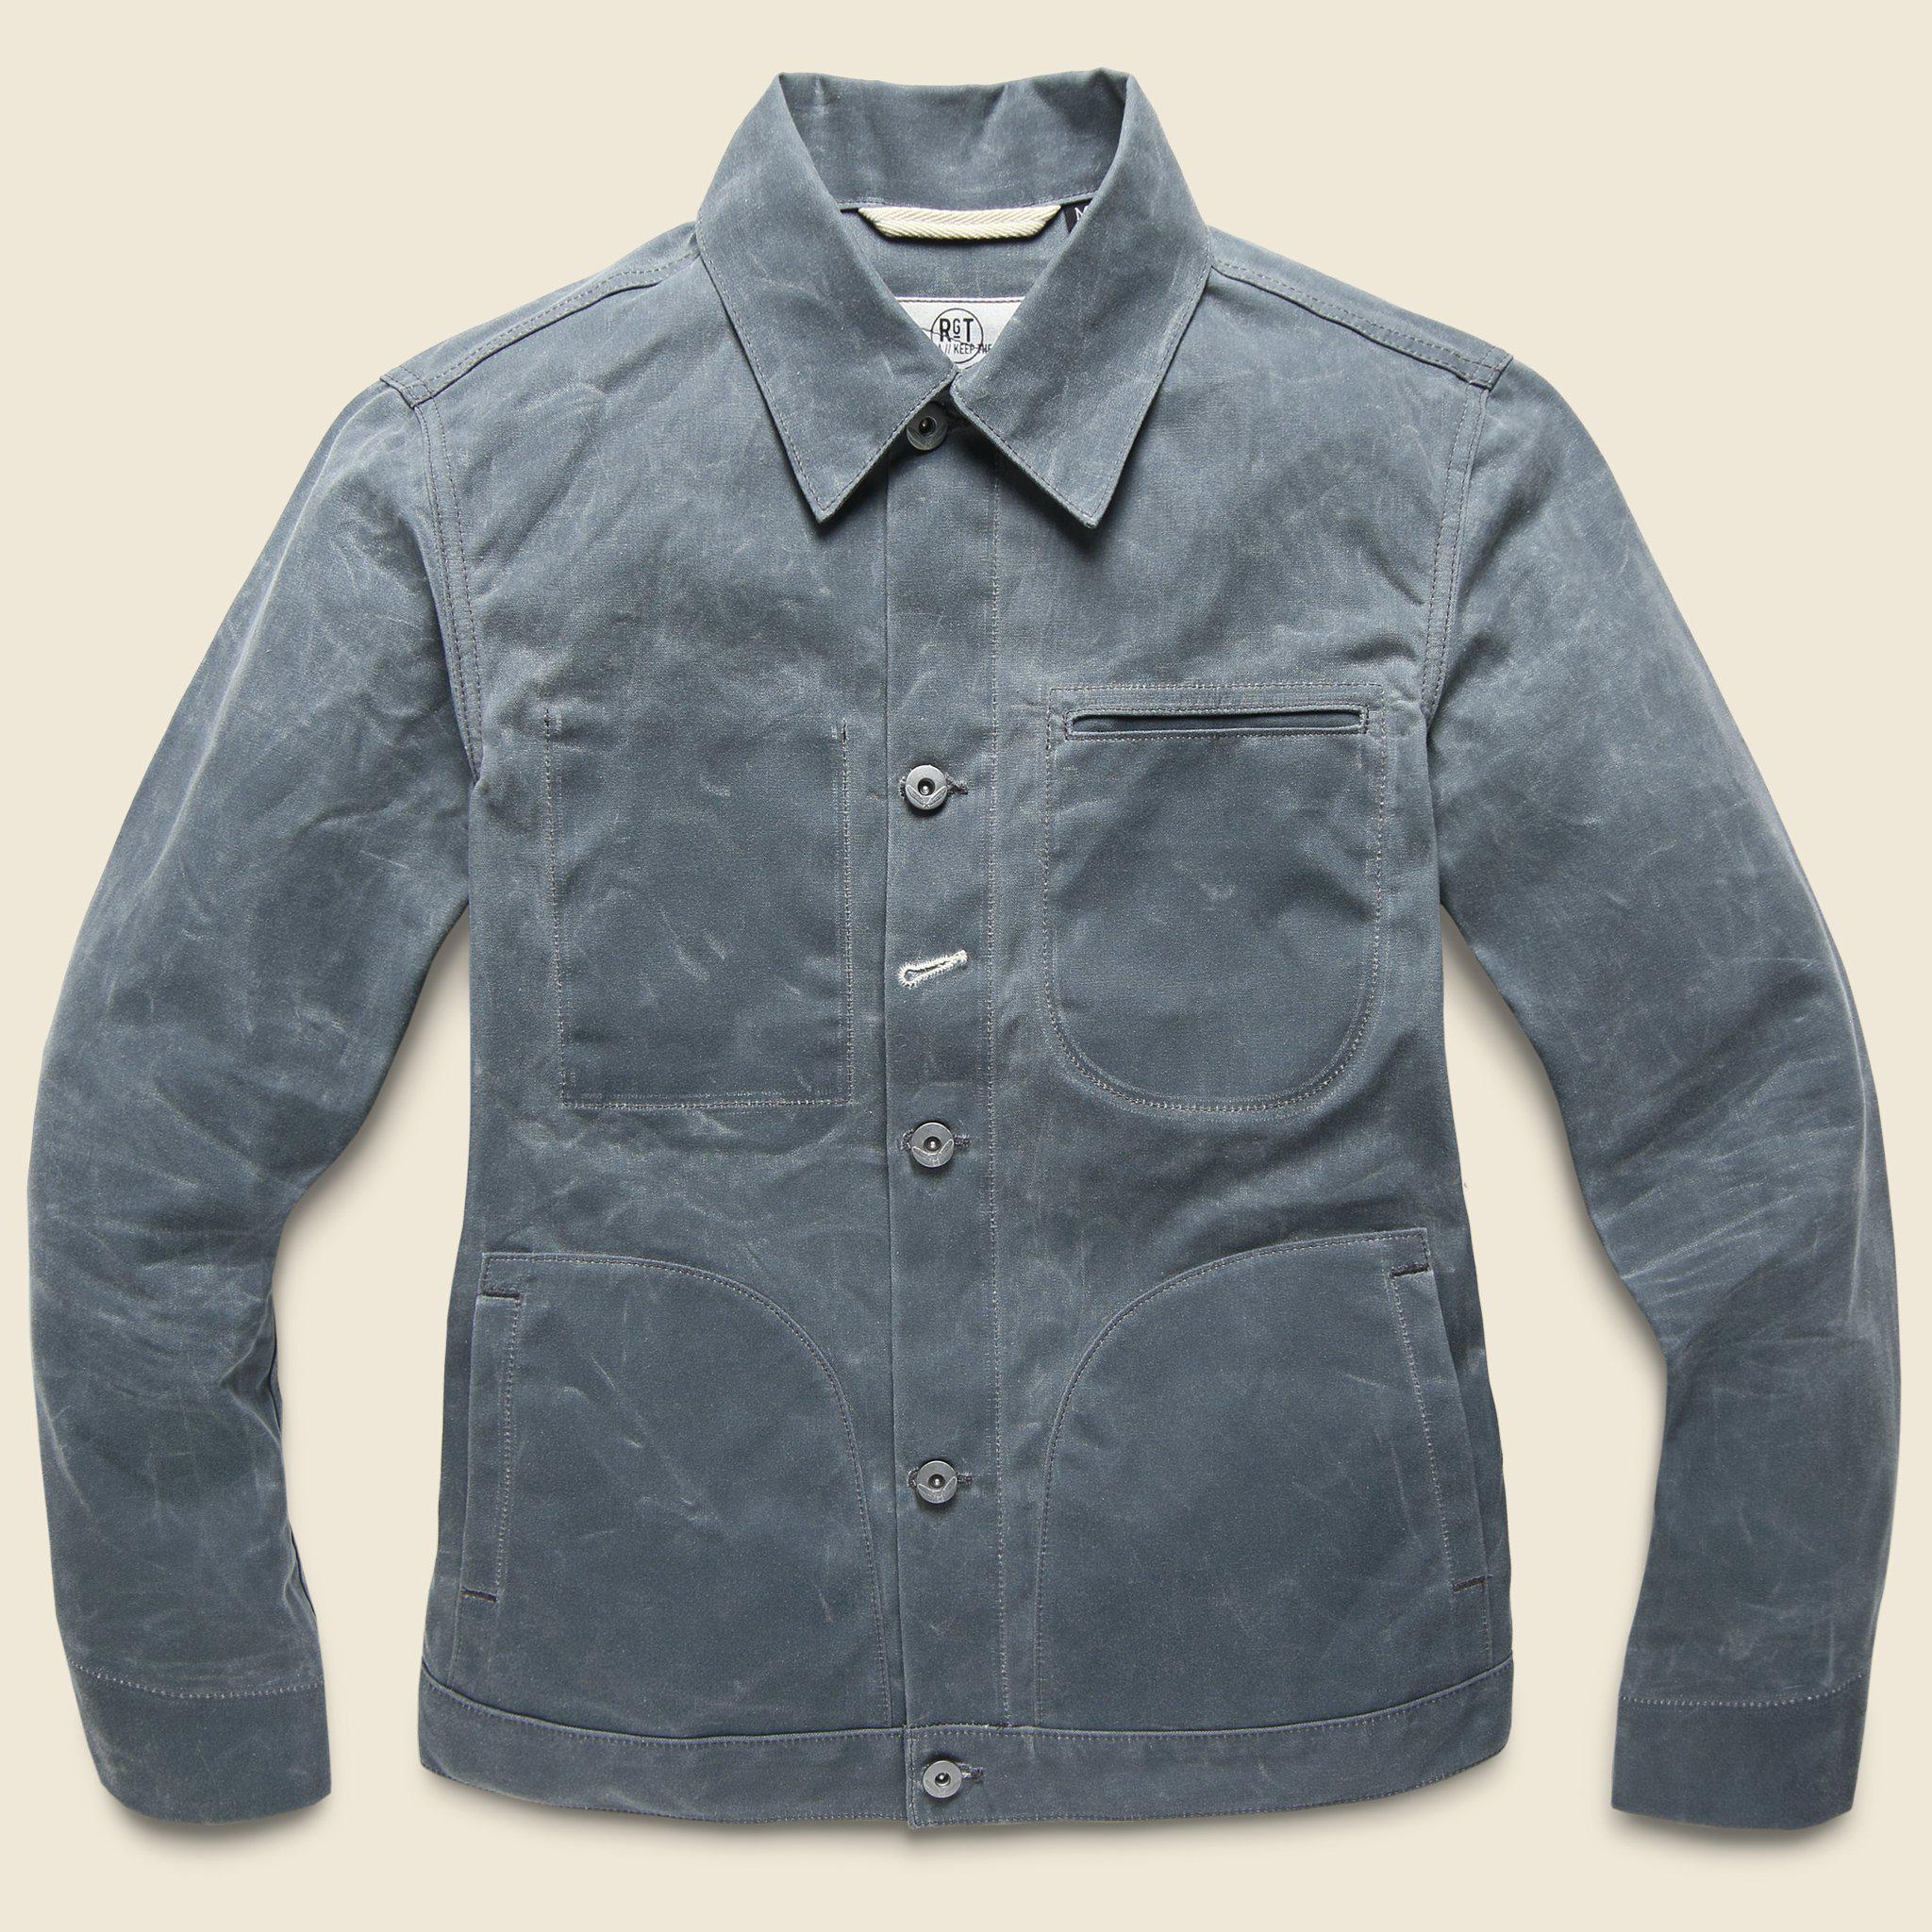 Rogue Territory Canvas Waxed Supply Jacket - Ridgeline Grey in Gray for ...